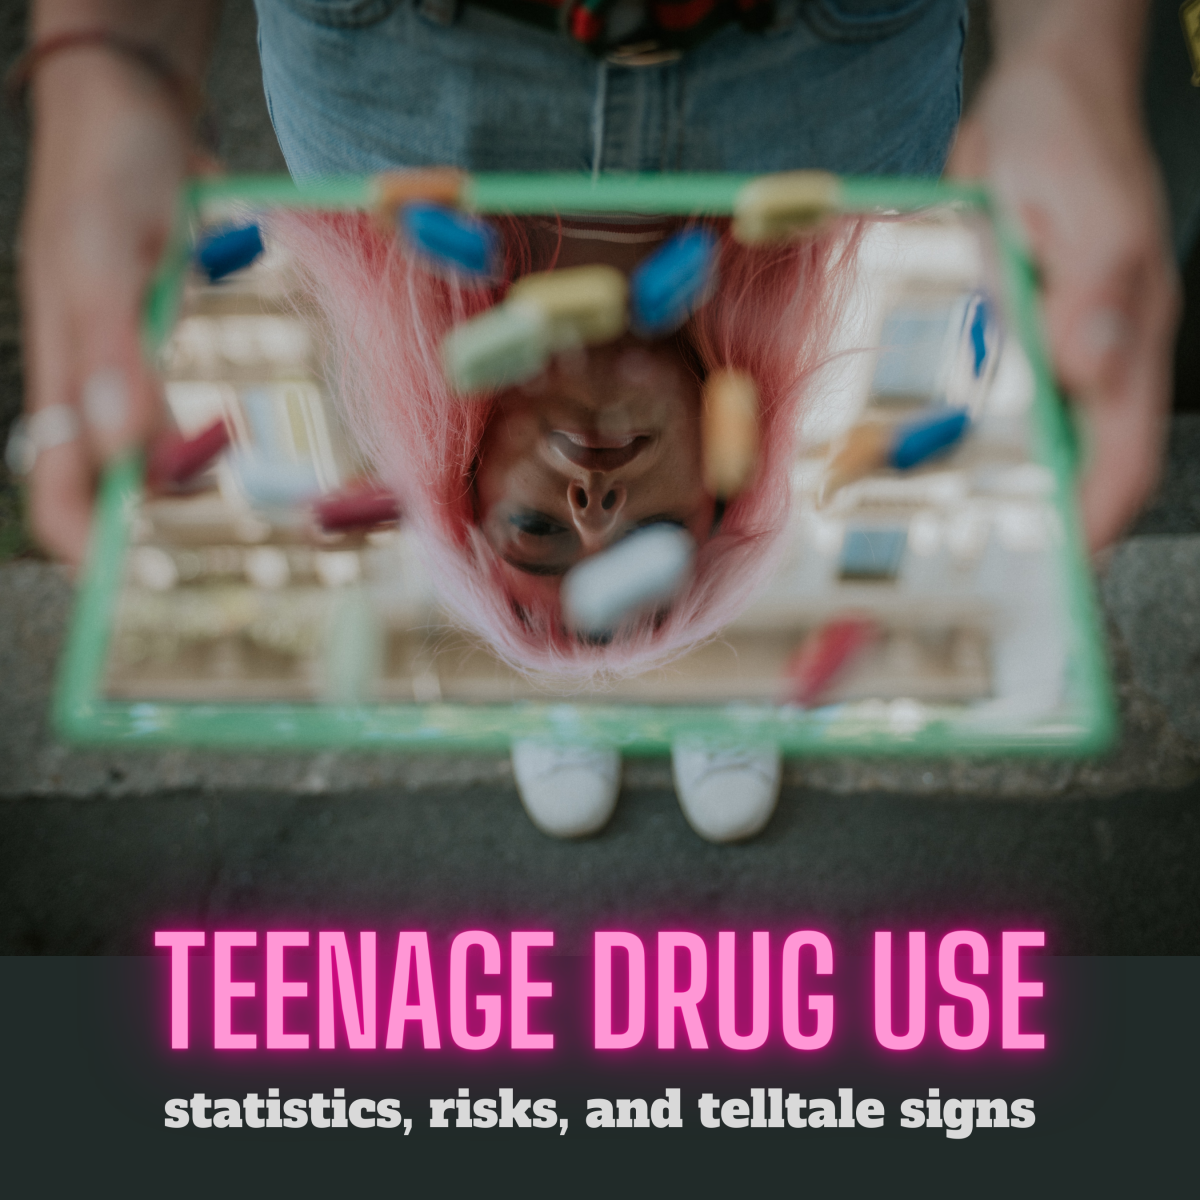 Teenage Drug Use: Risks, Statistics, and Signs to Look For